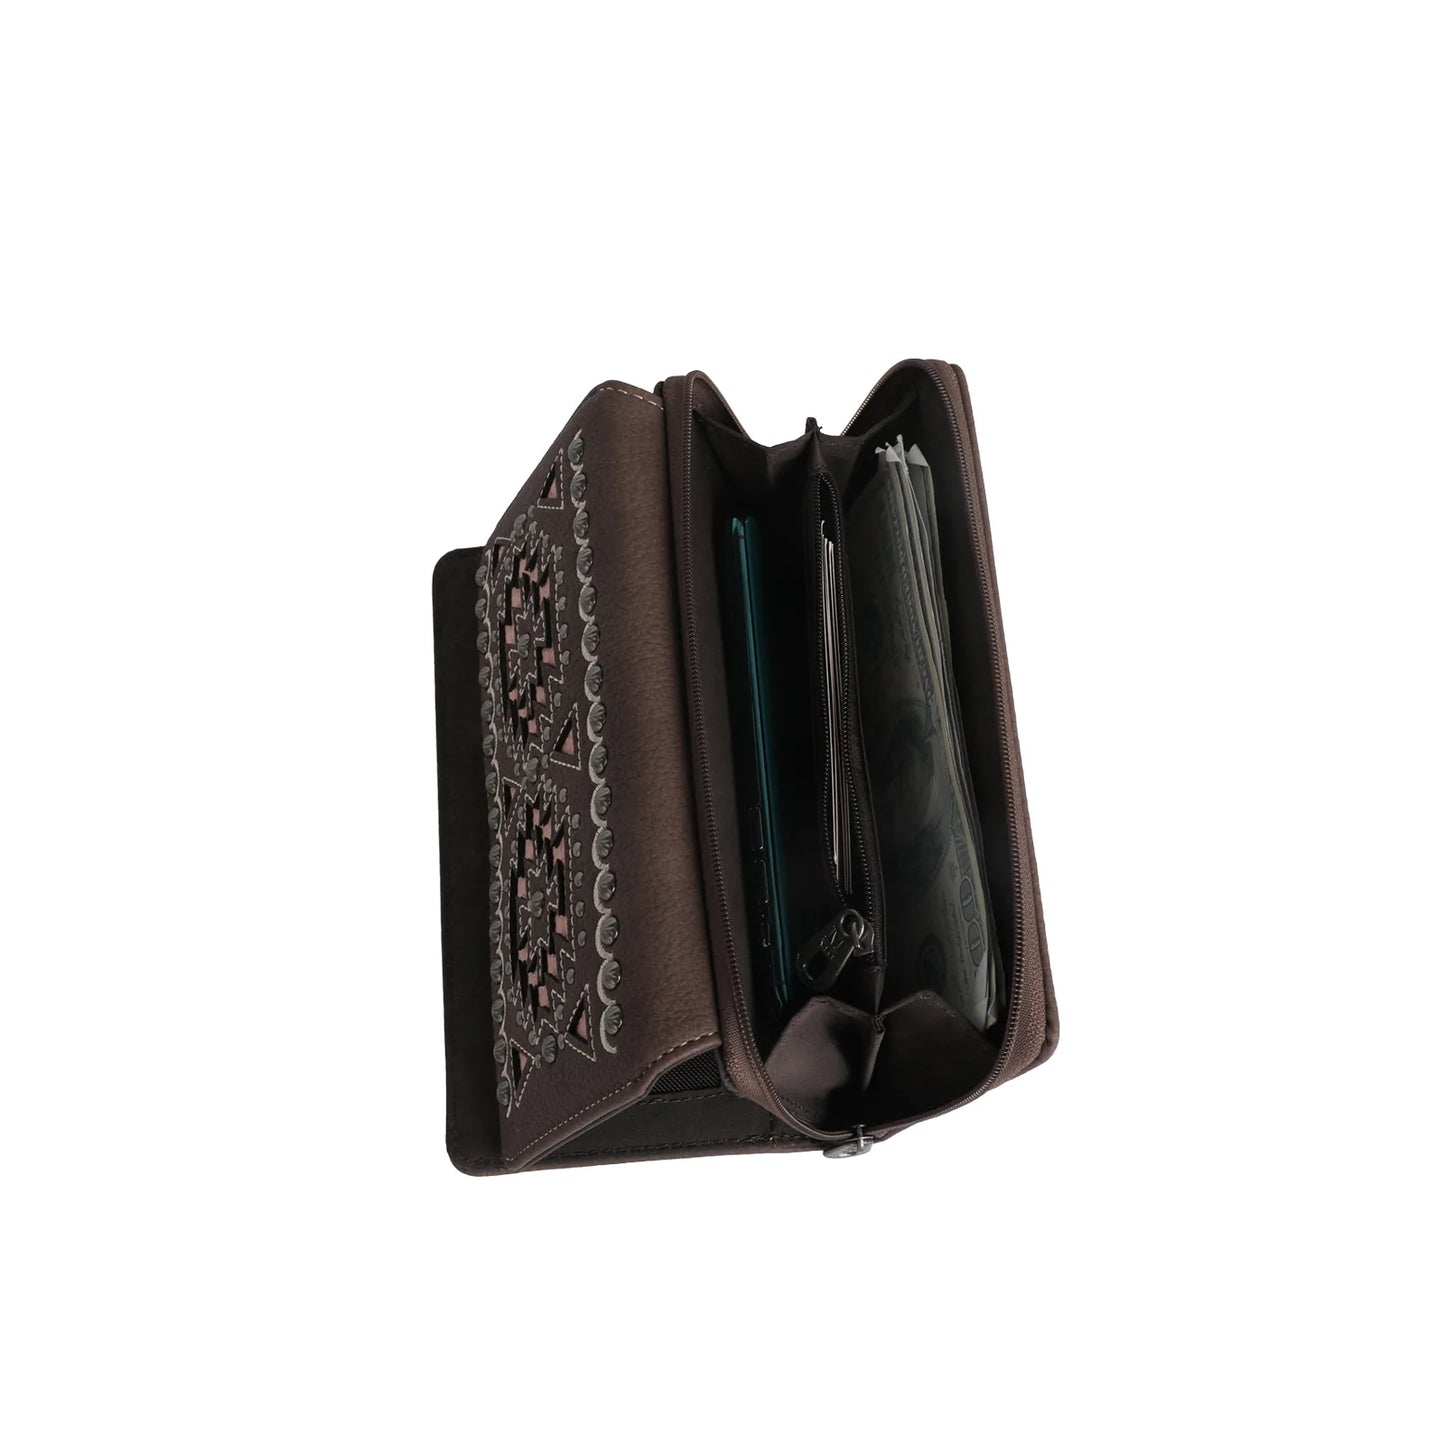 MW1092W010 - Montana West Cut Out Aztec Collection Wallet